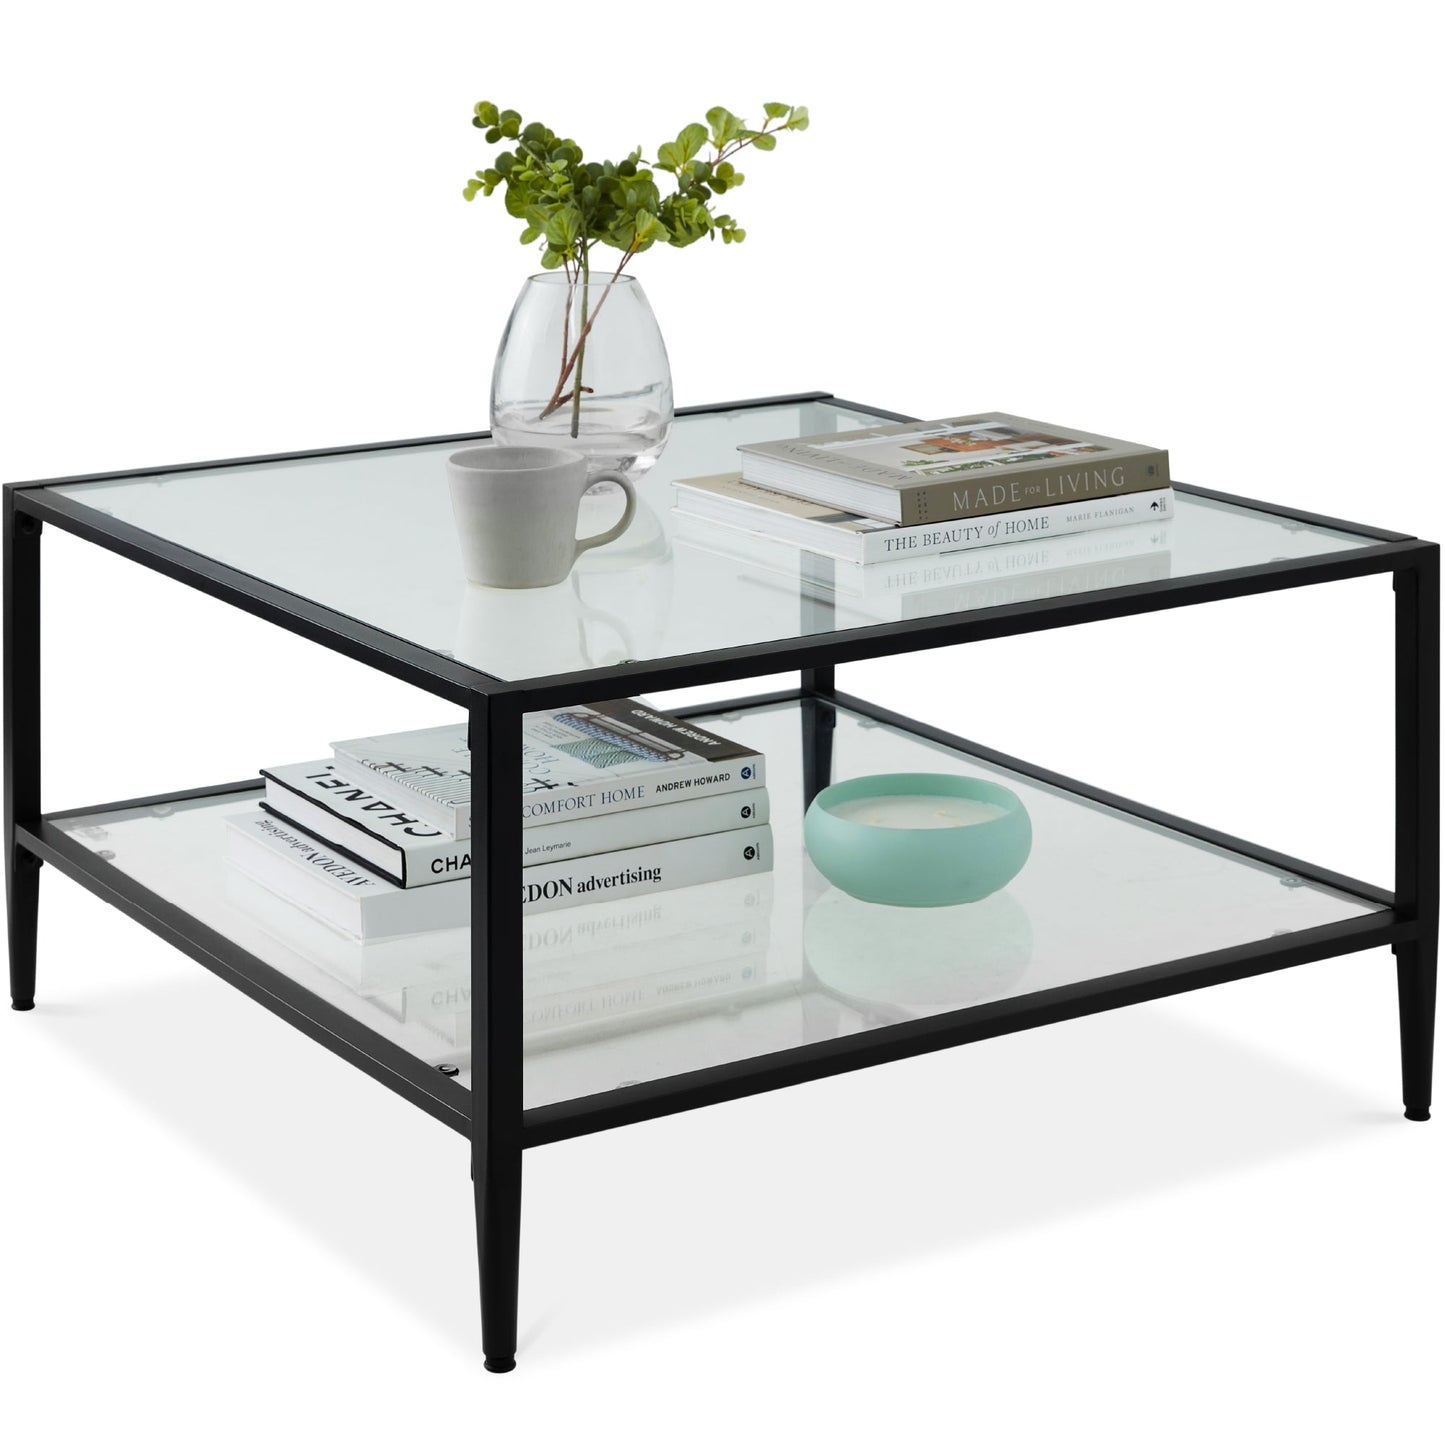 2-Tier Square Coffee Table Living Room Accent w/ Glass Top - 32x32in